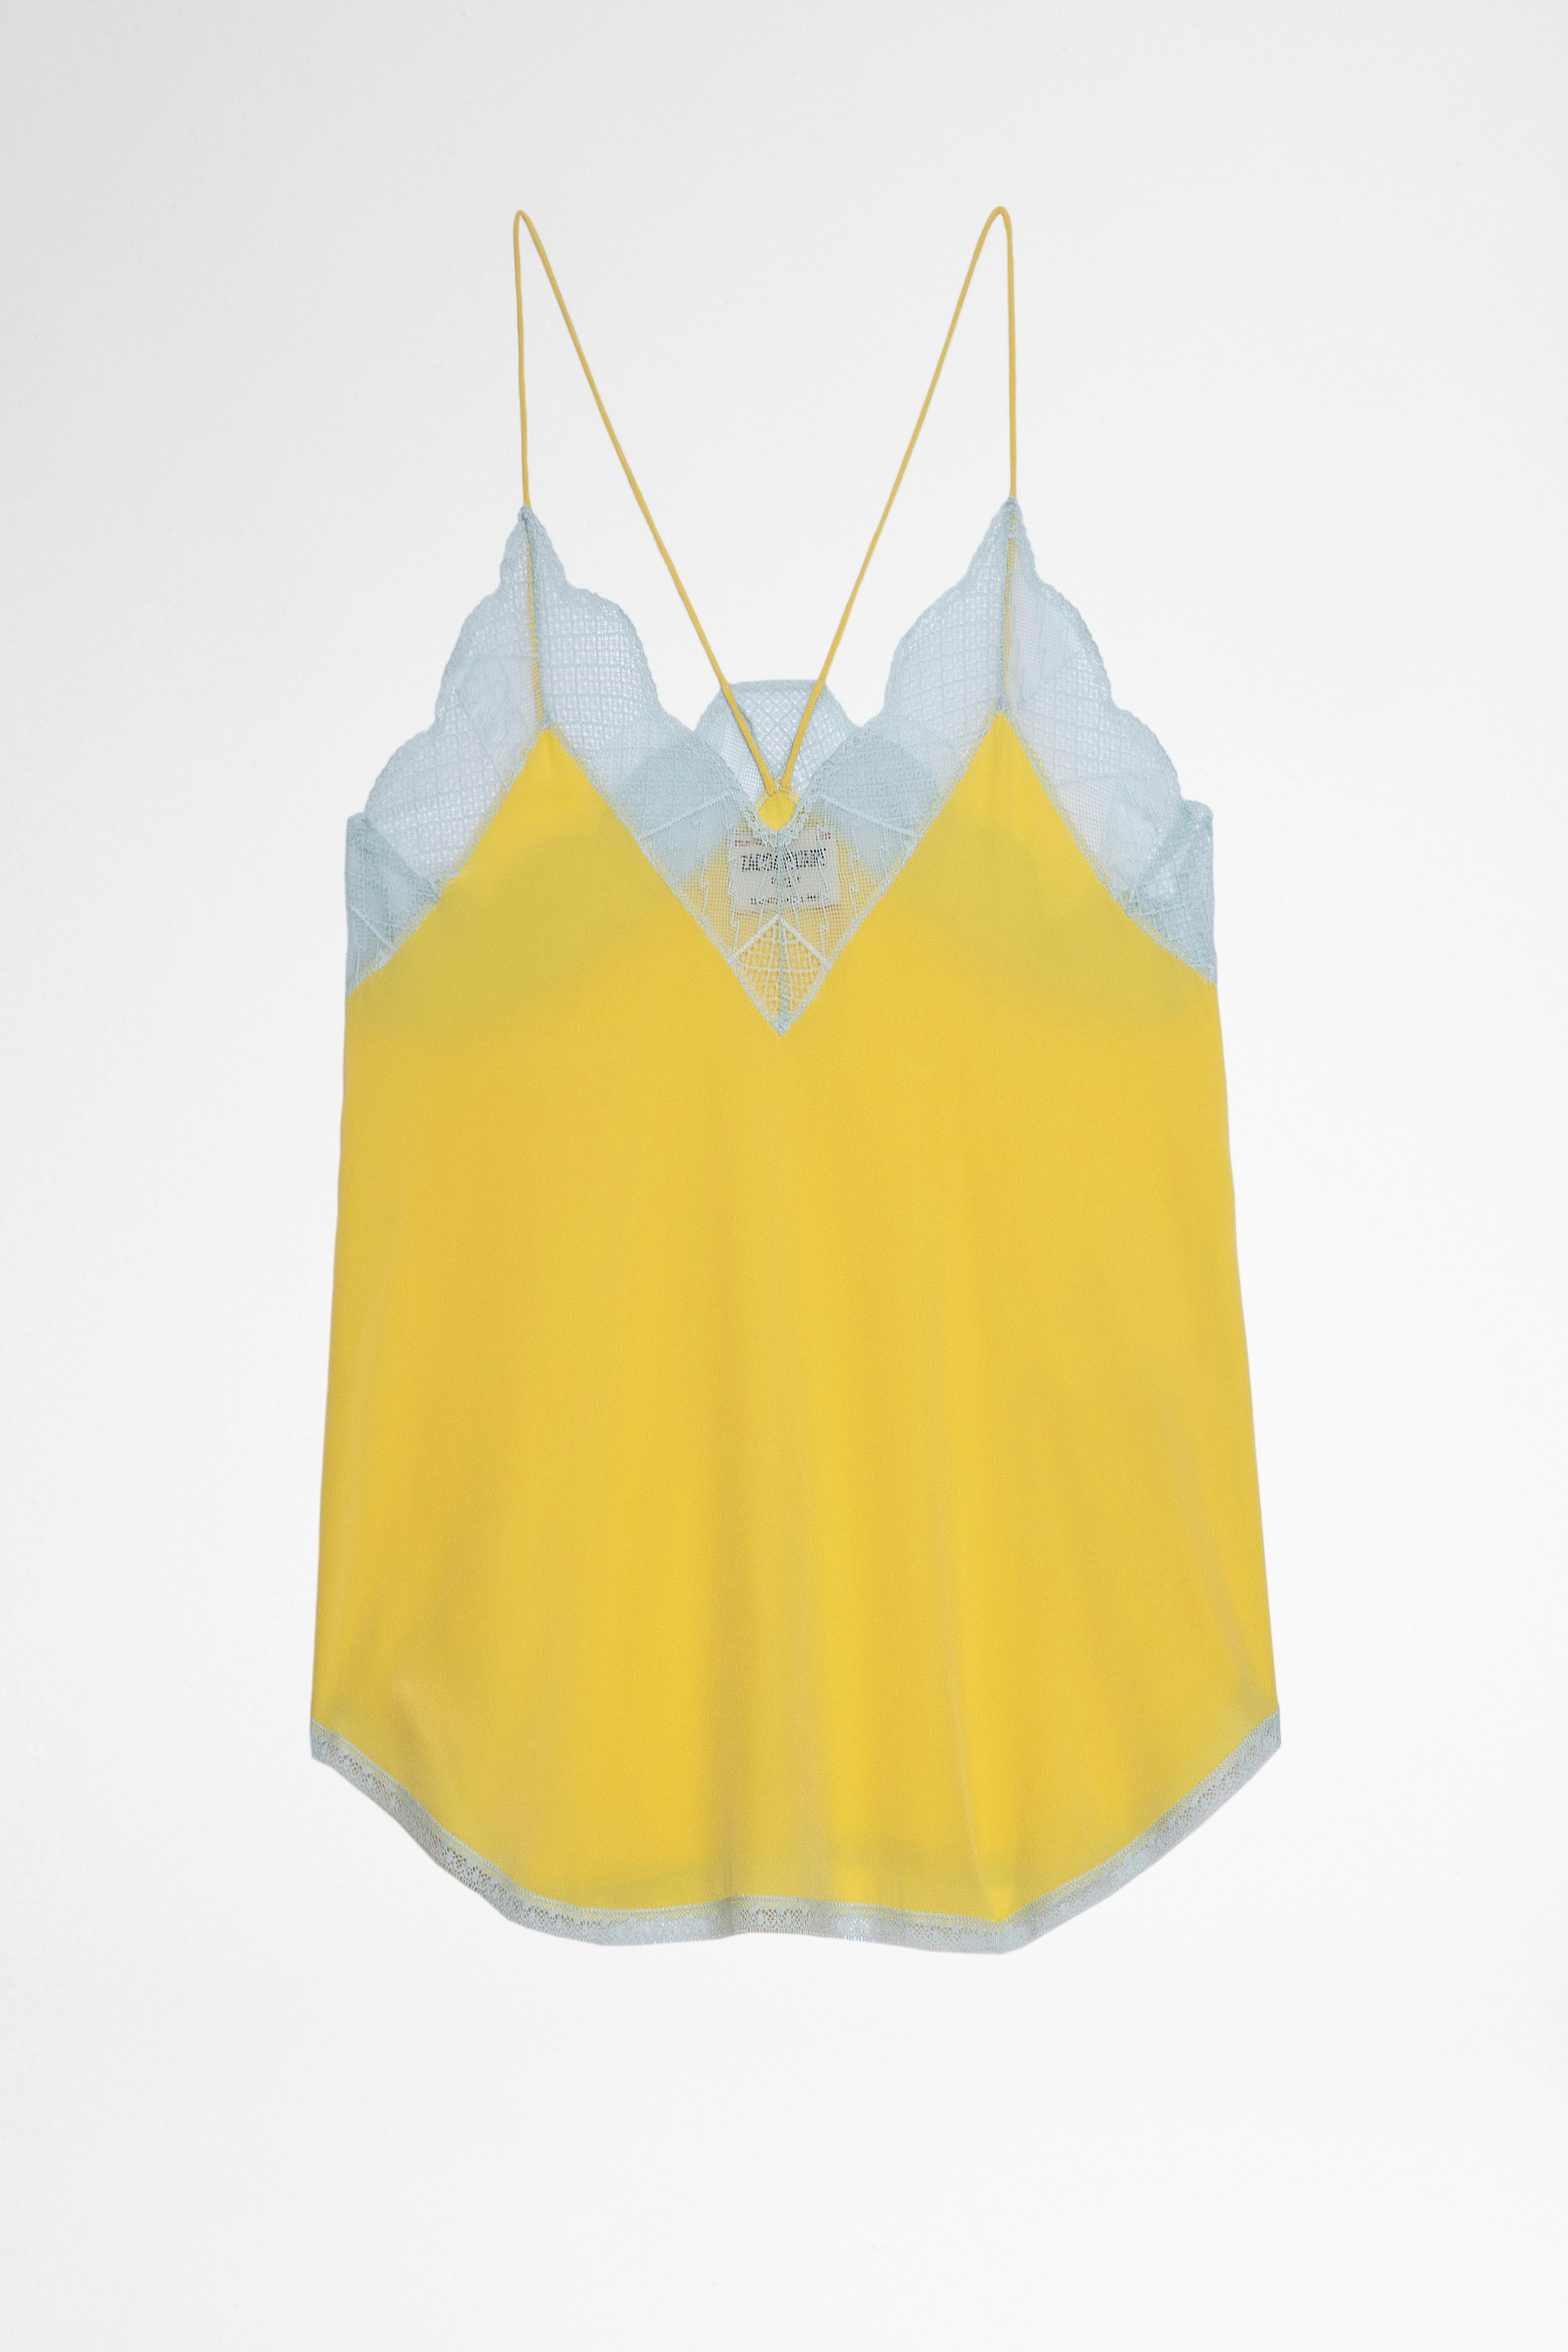 Christy Silk Camisole Women's camisole in yellow with lace trim